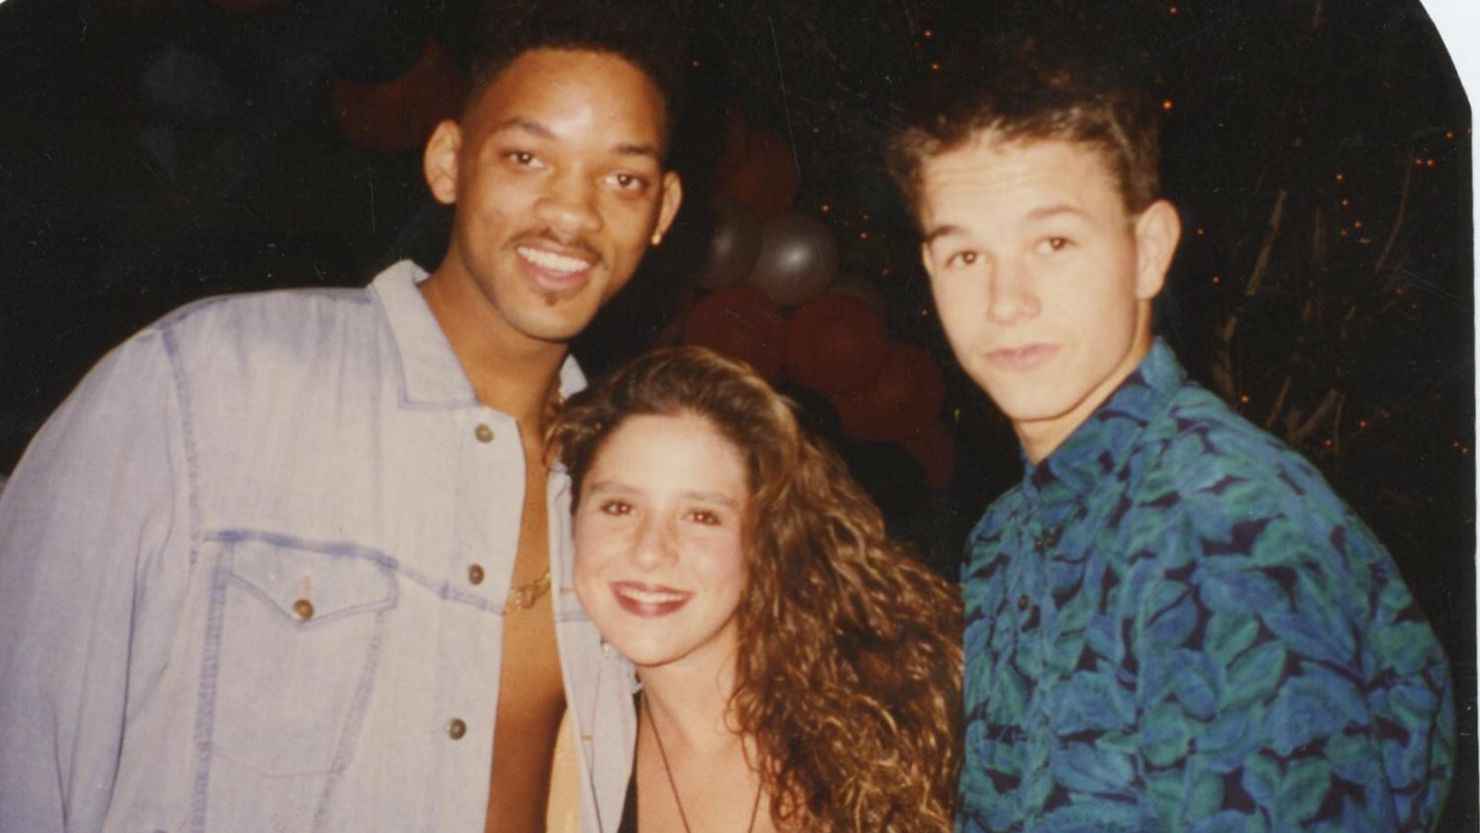 Soleil Moon Frye with Will Smith and Mark Wahlberg, as shown in the documentary 'Kid 90' (Courtesy of Soleil Moon Frye).